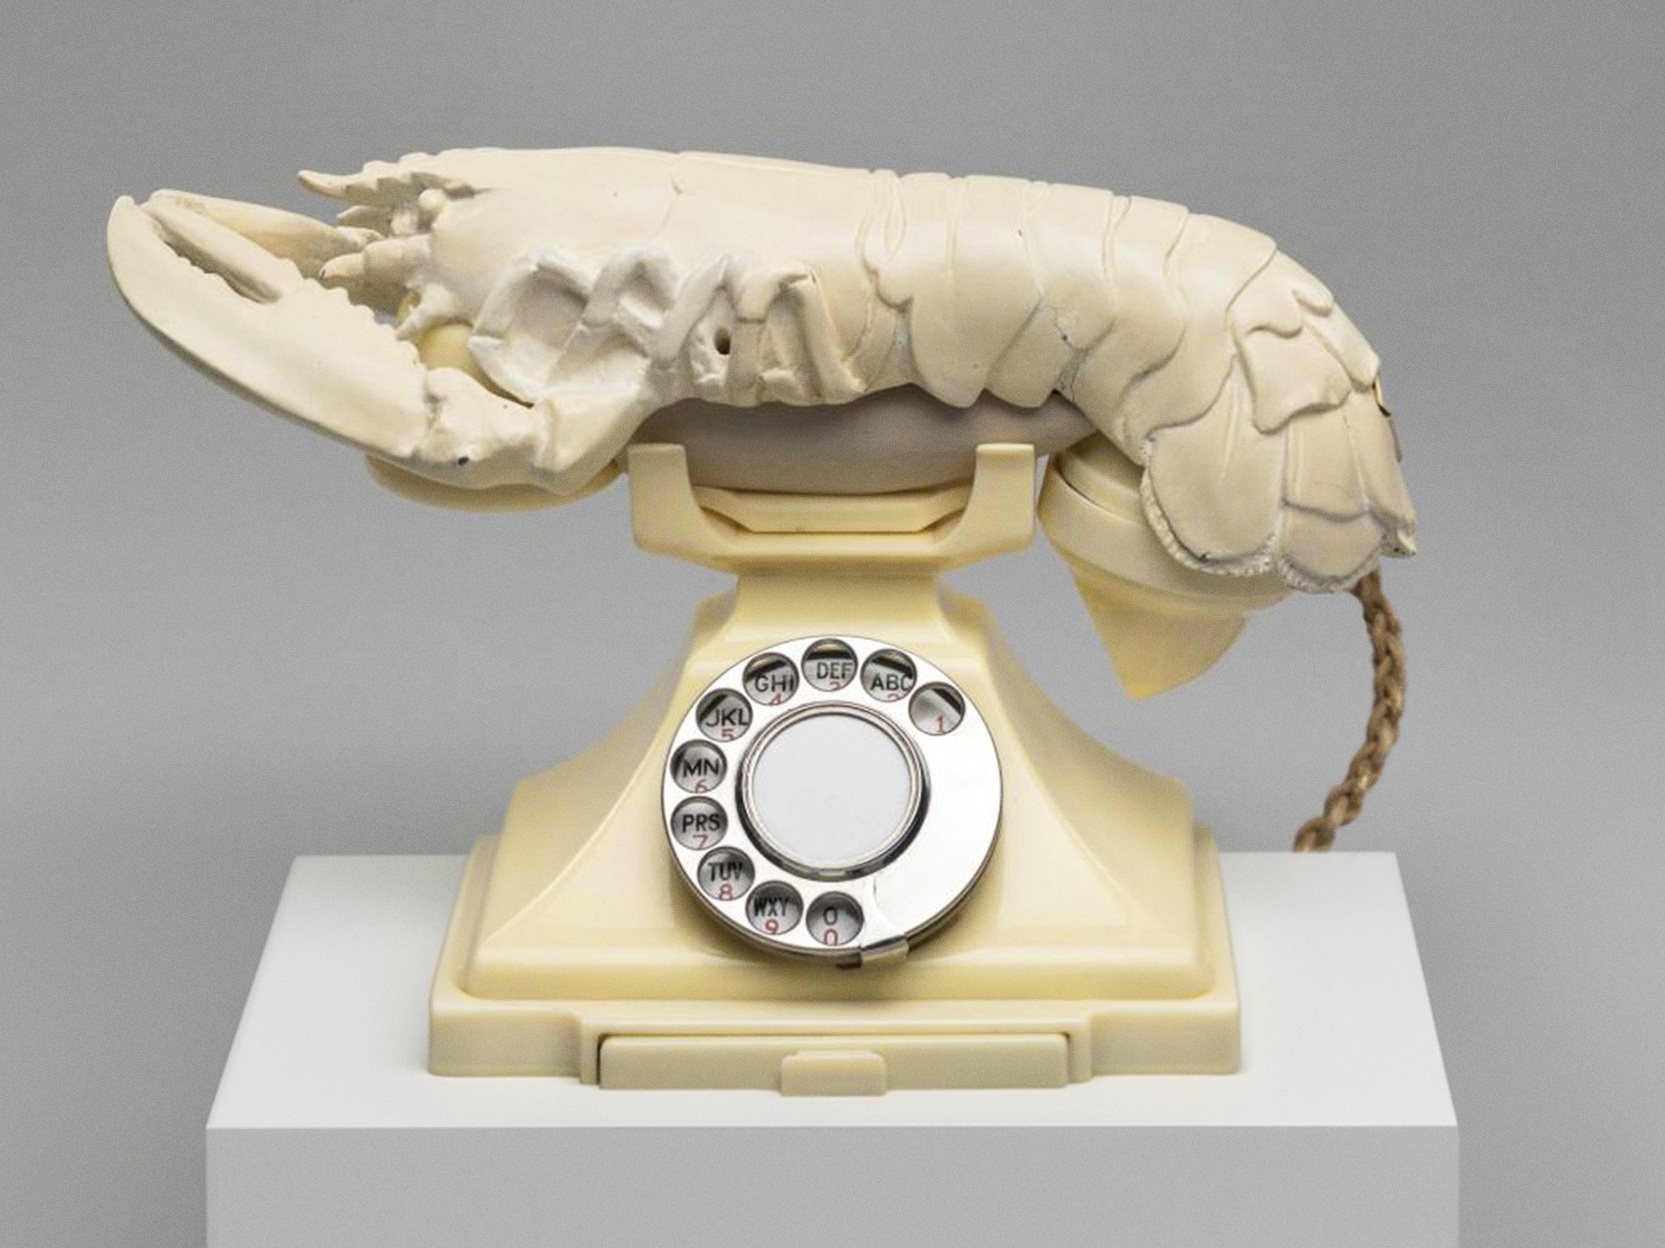 An AI Salvador Dalí will answer any question when called on his famous ‘lobster phone’